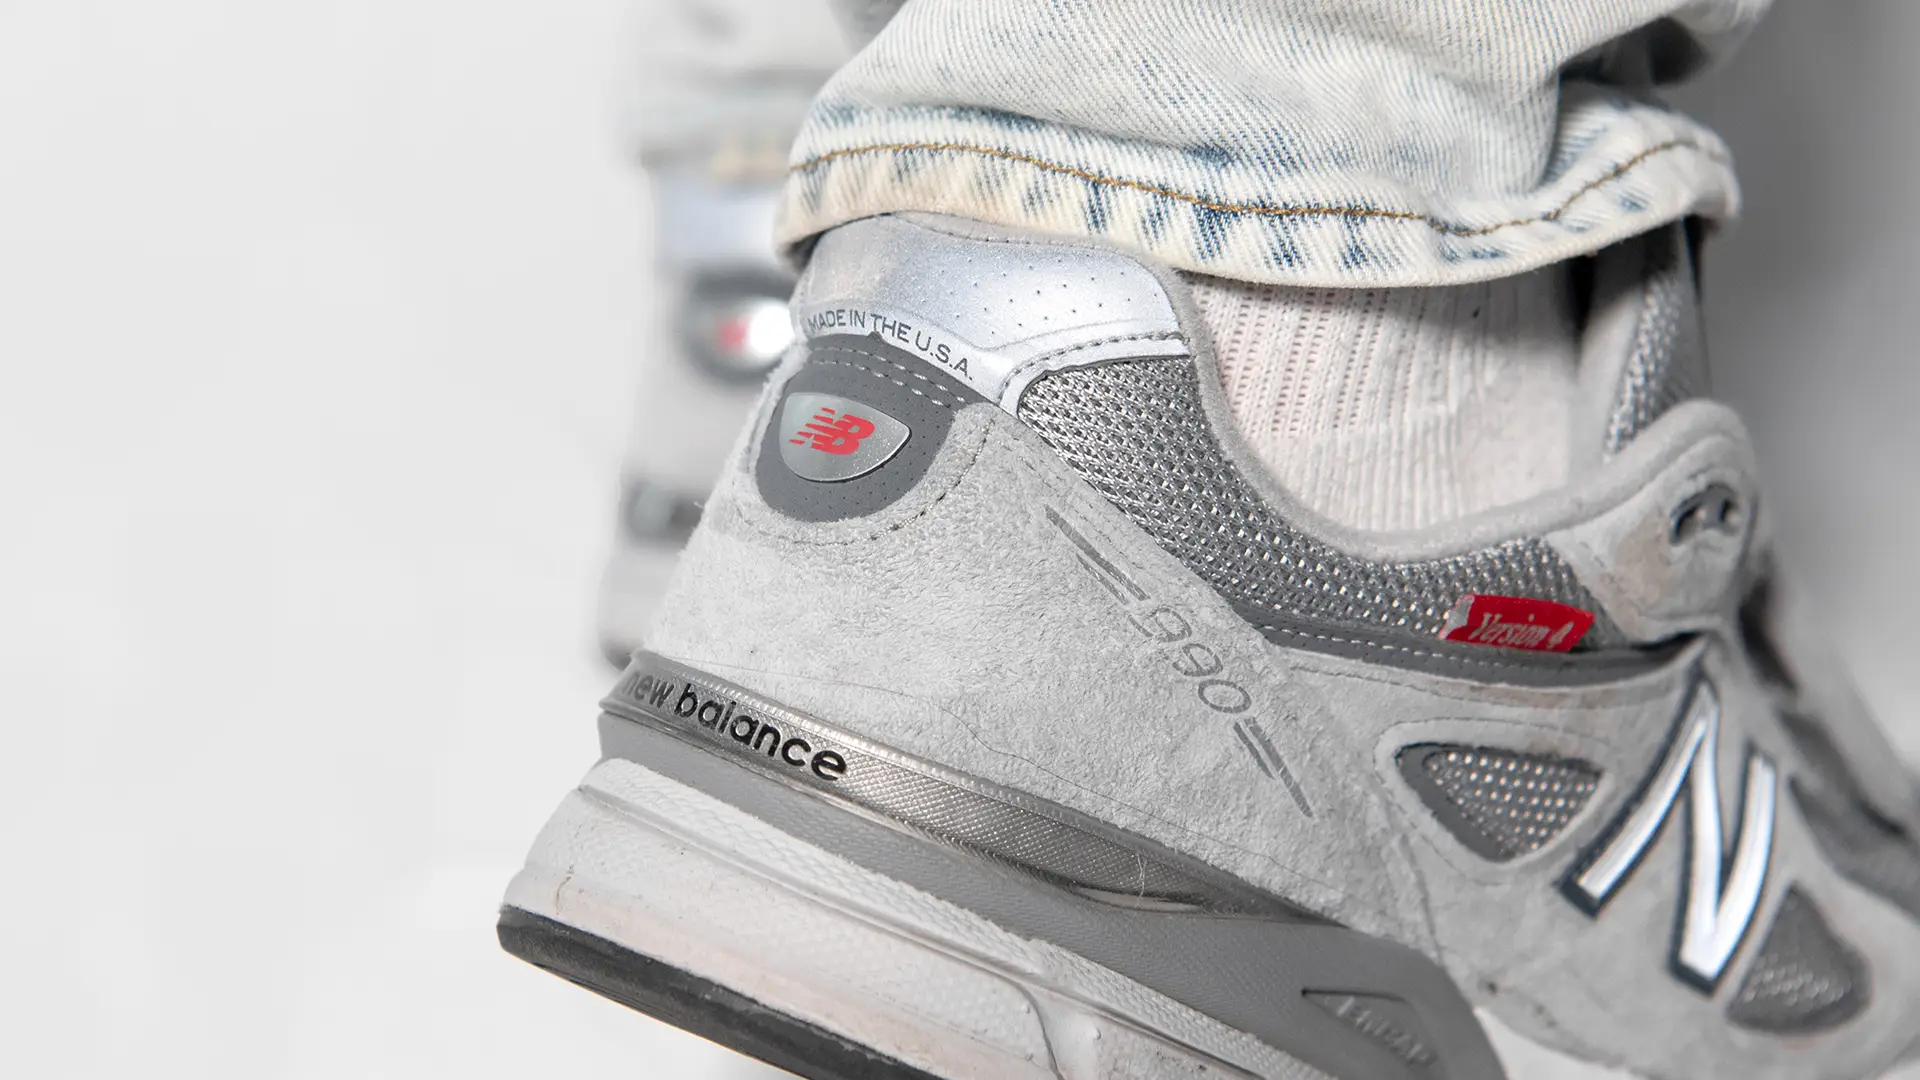 New Balance 990 Became a Cult Classic